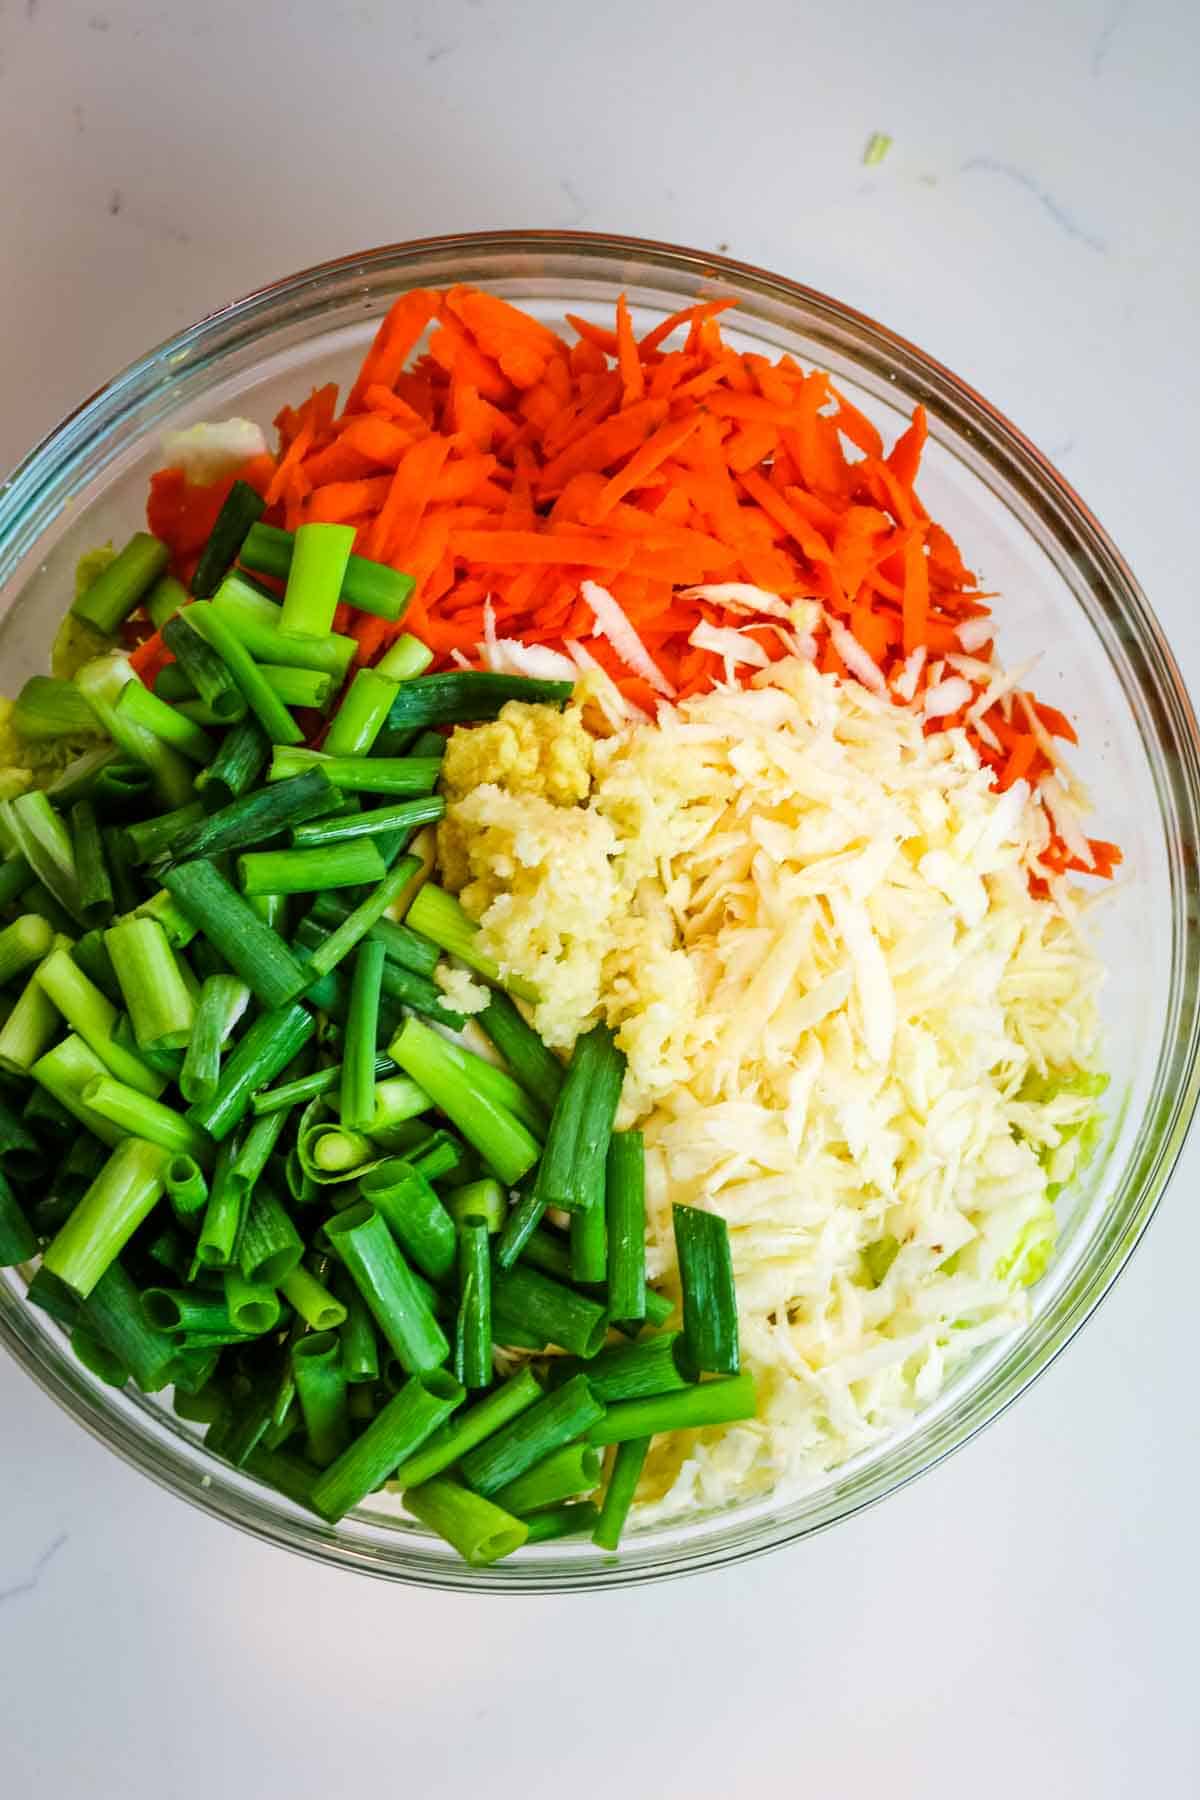 carrots, radish, and green onions added to napa cabbage in kimchi recipe.